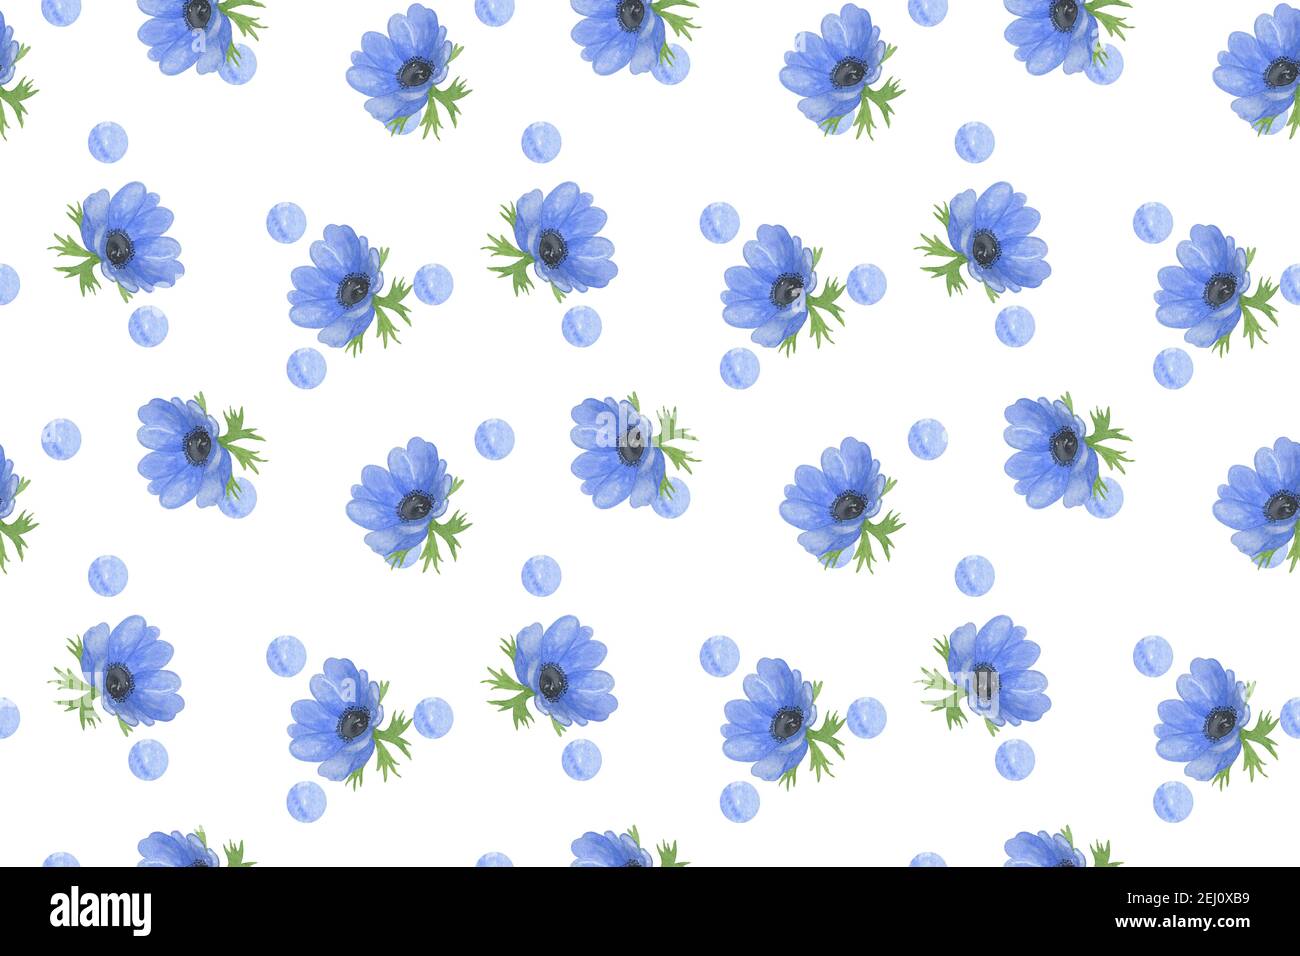 Repeat pattern of delicate flowers and leaves, blue anemones and polka dot seamless ornament, suitable for making fabric, gift paper Stock Photo